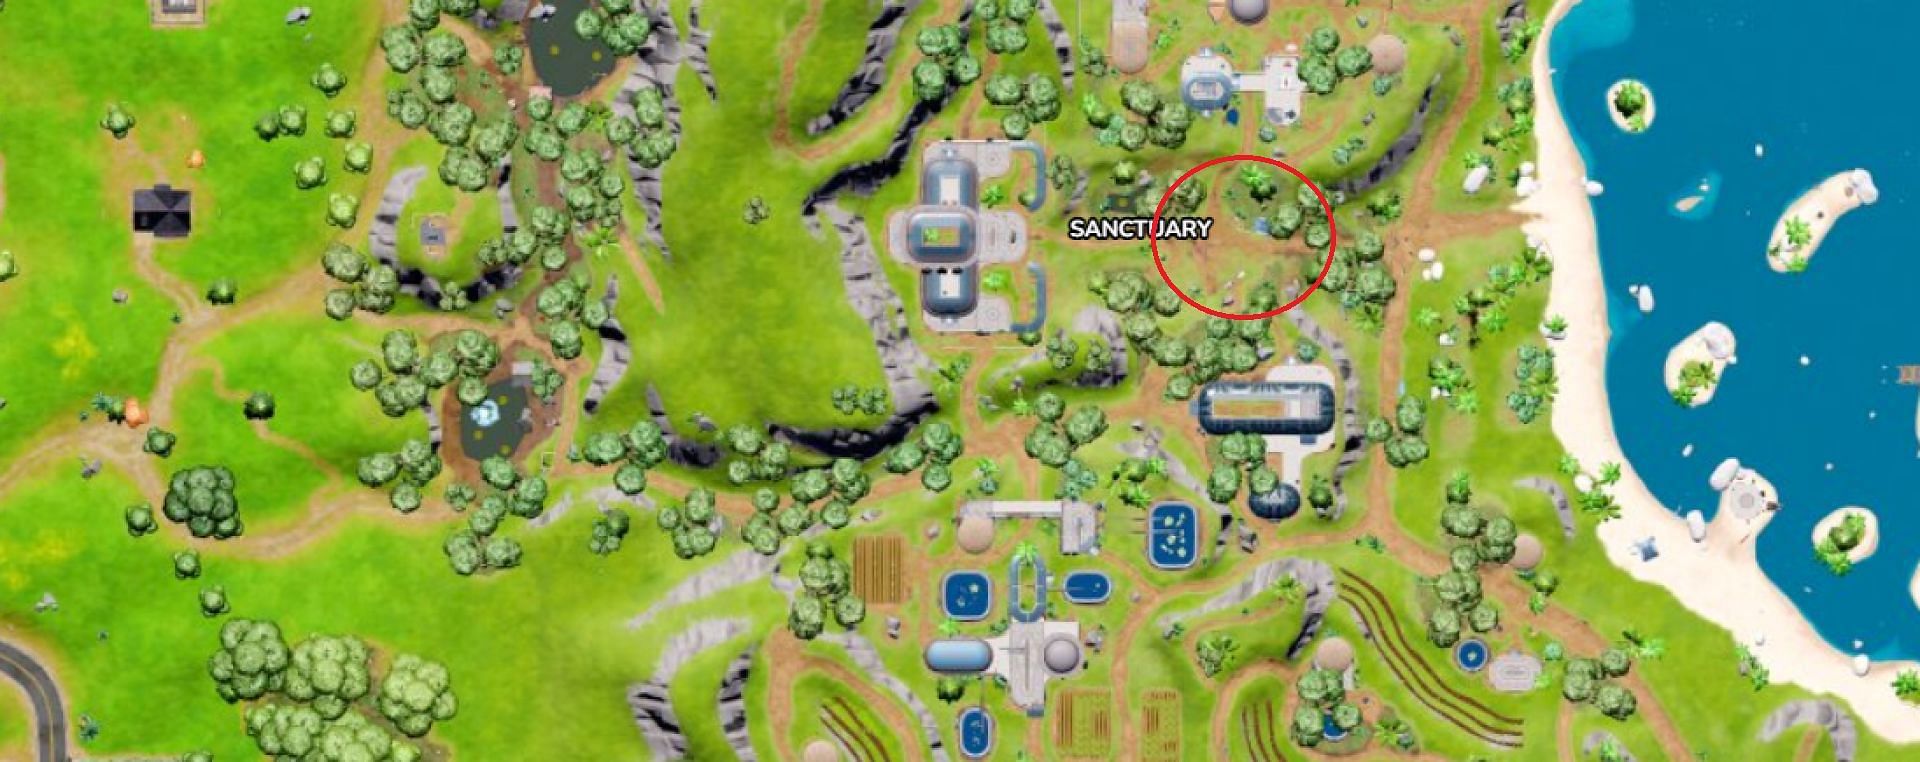 Turret location in Sanctuary circled in red (Image via Fortnite.GG)